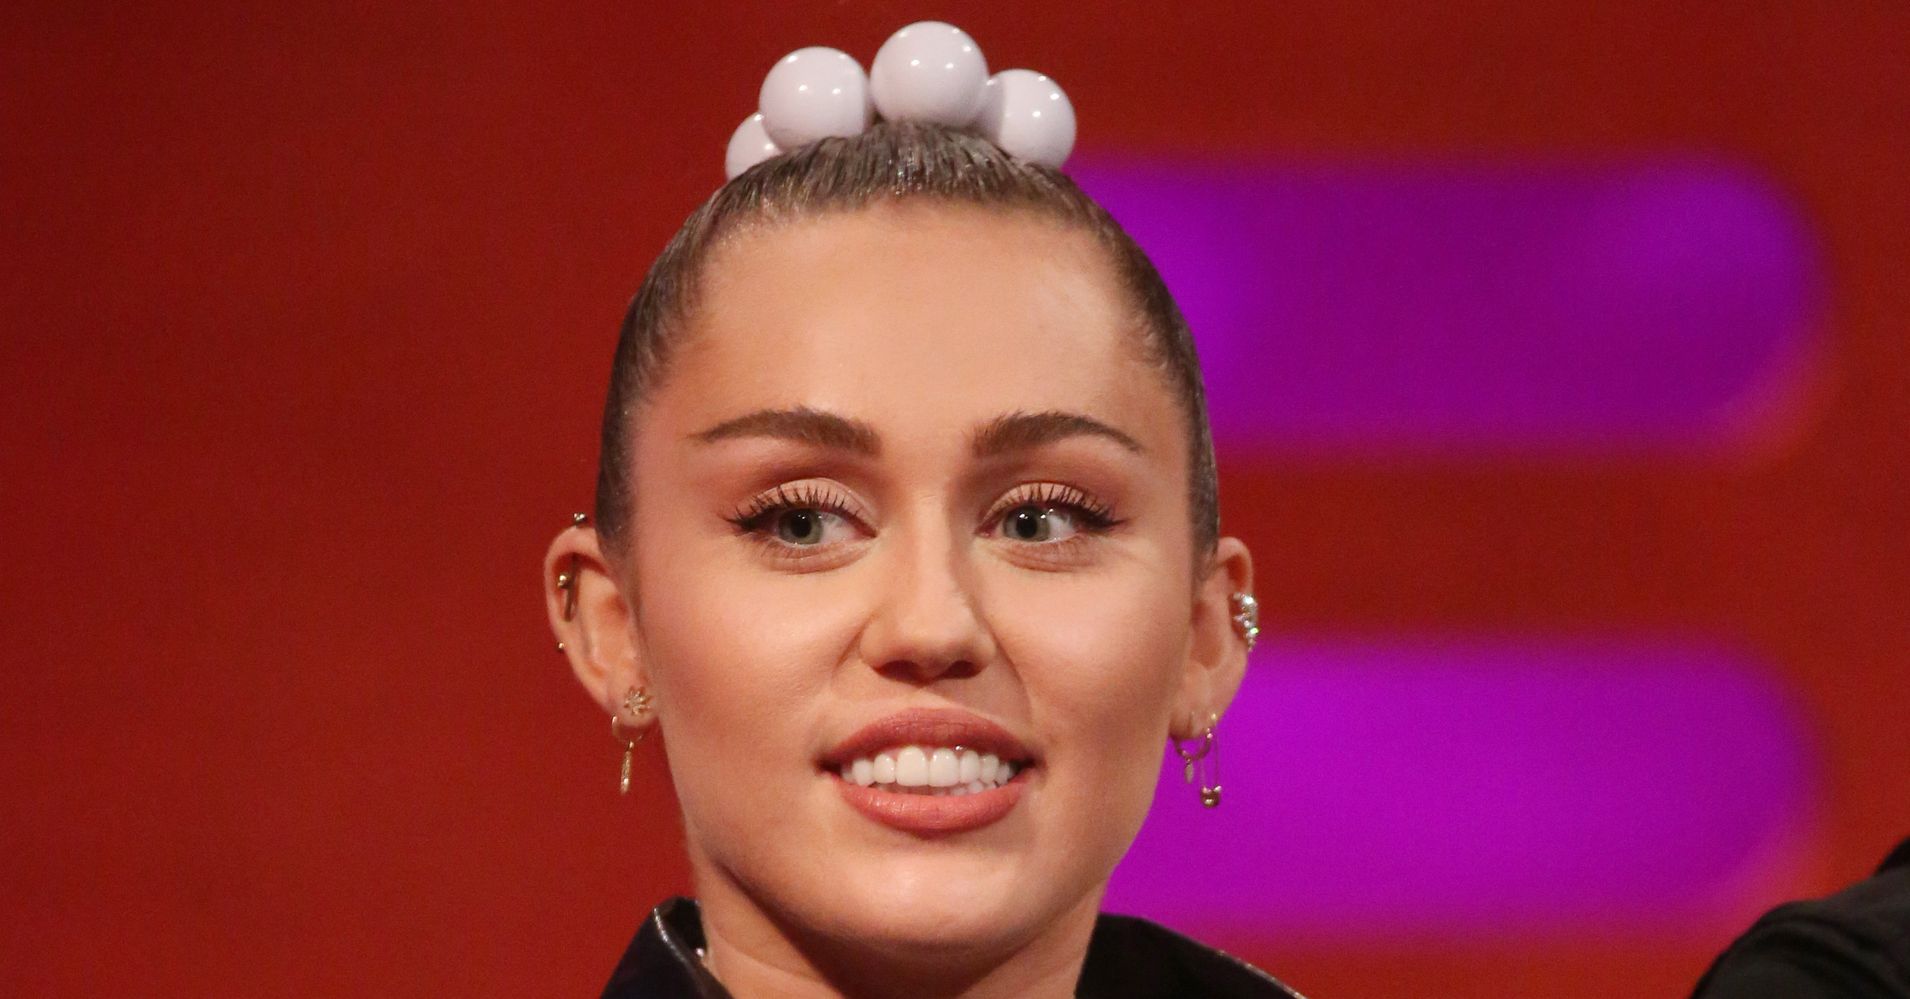 Miley Cyrus Shuts Down Pregnancy Rumors With Egg Cellent Response Huffpost 0186